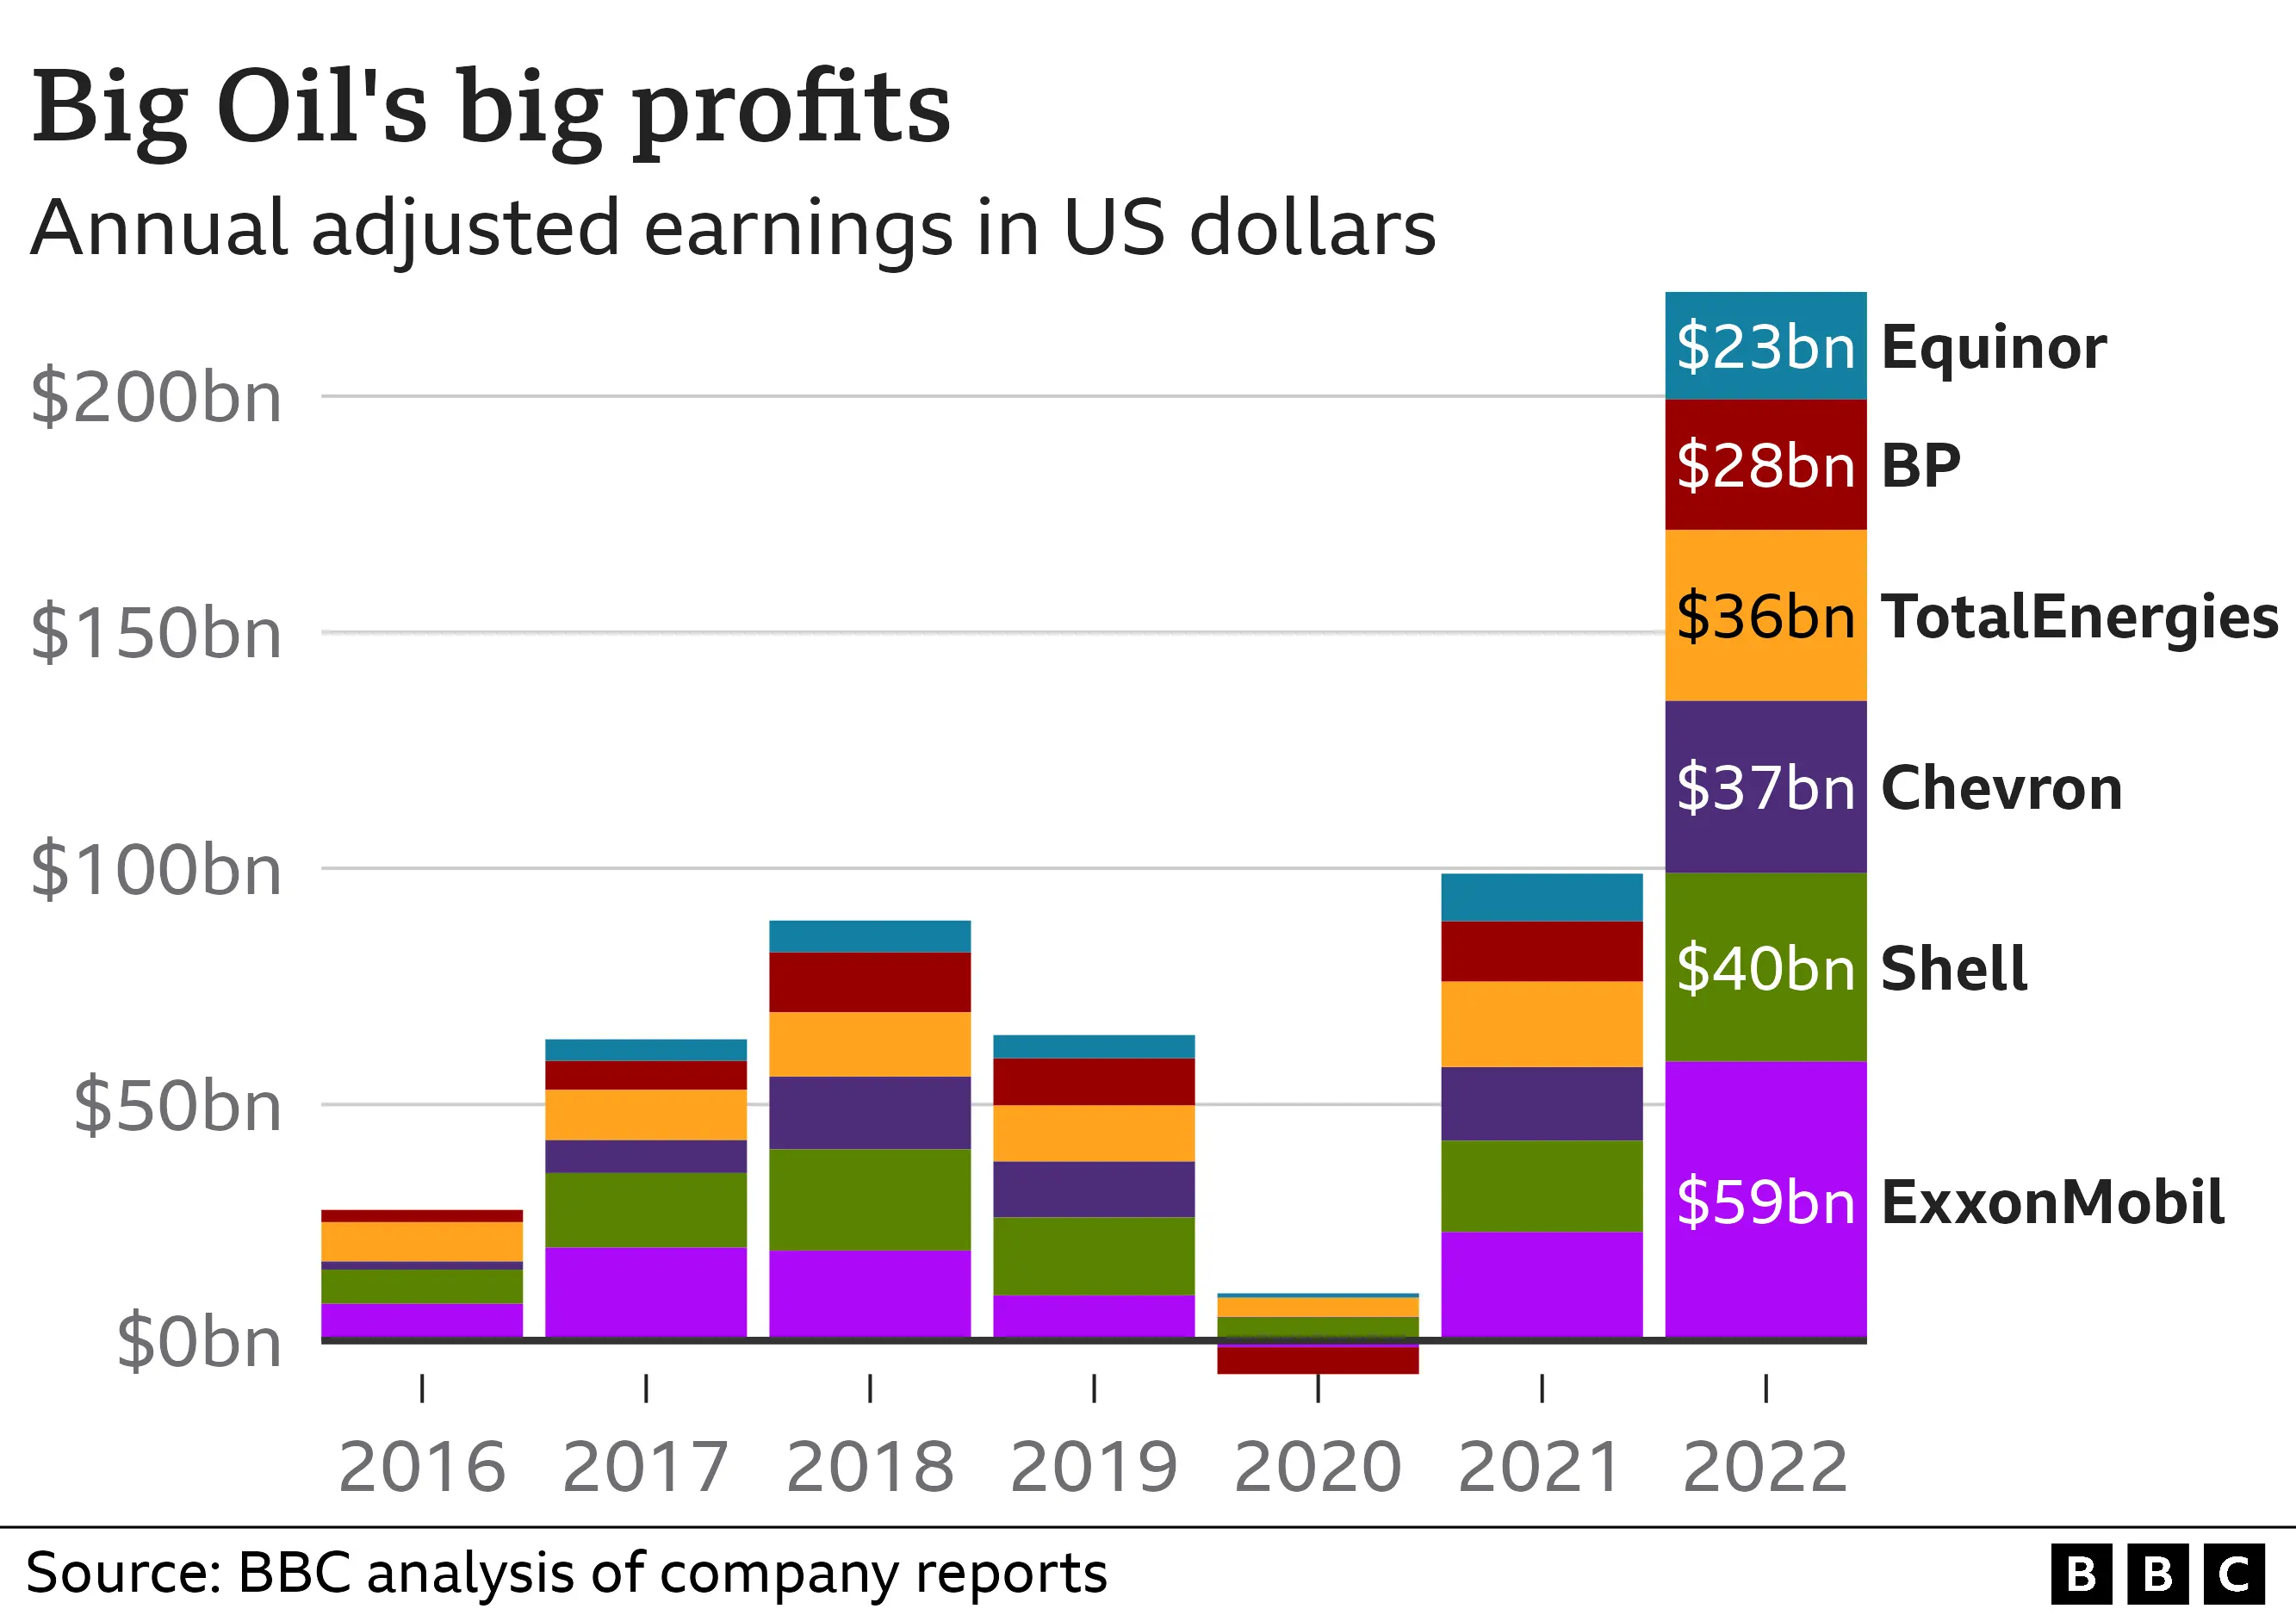 Why are BP, Shell, and other oil giants making so much money right